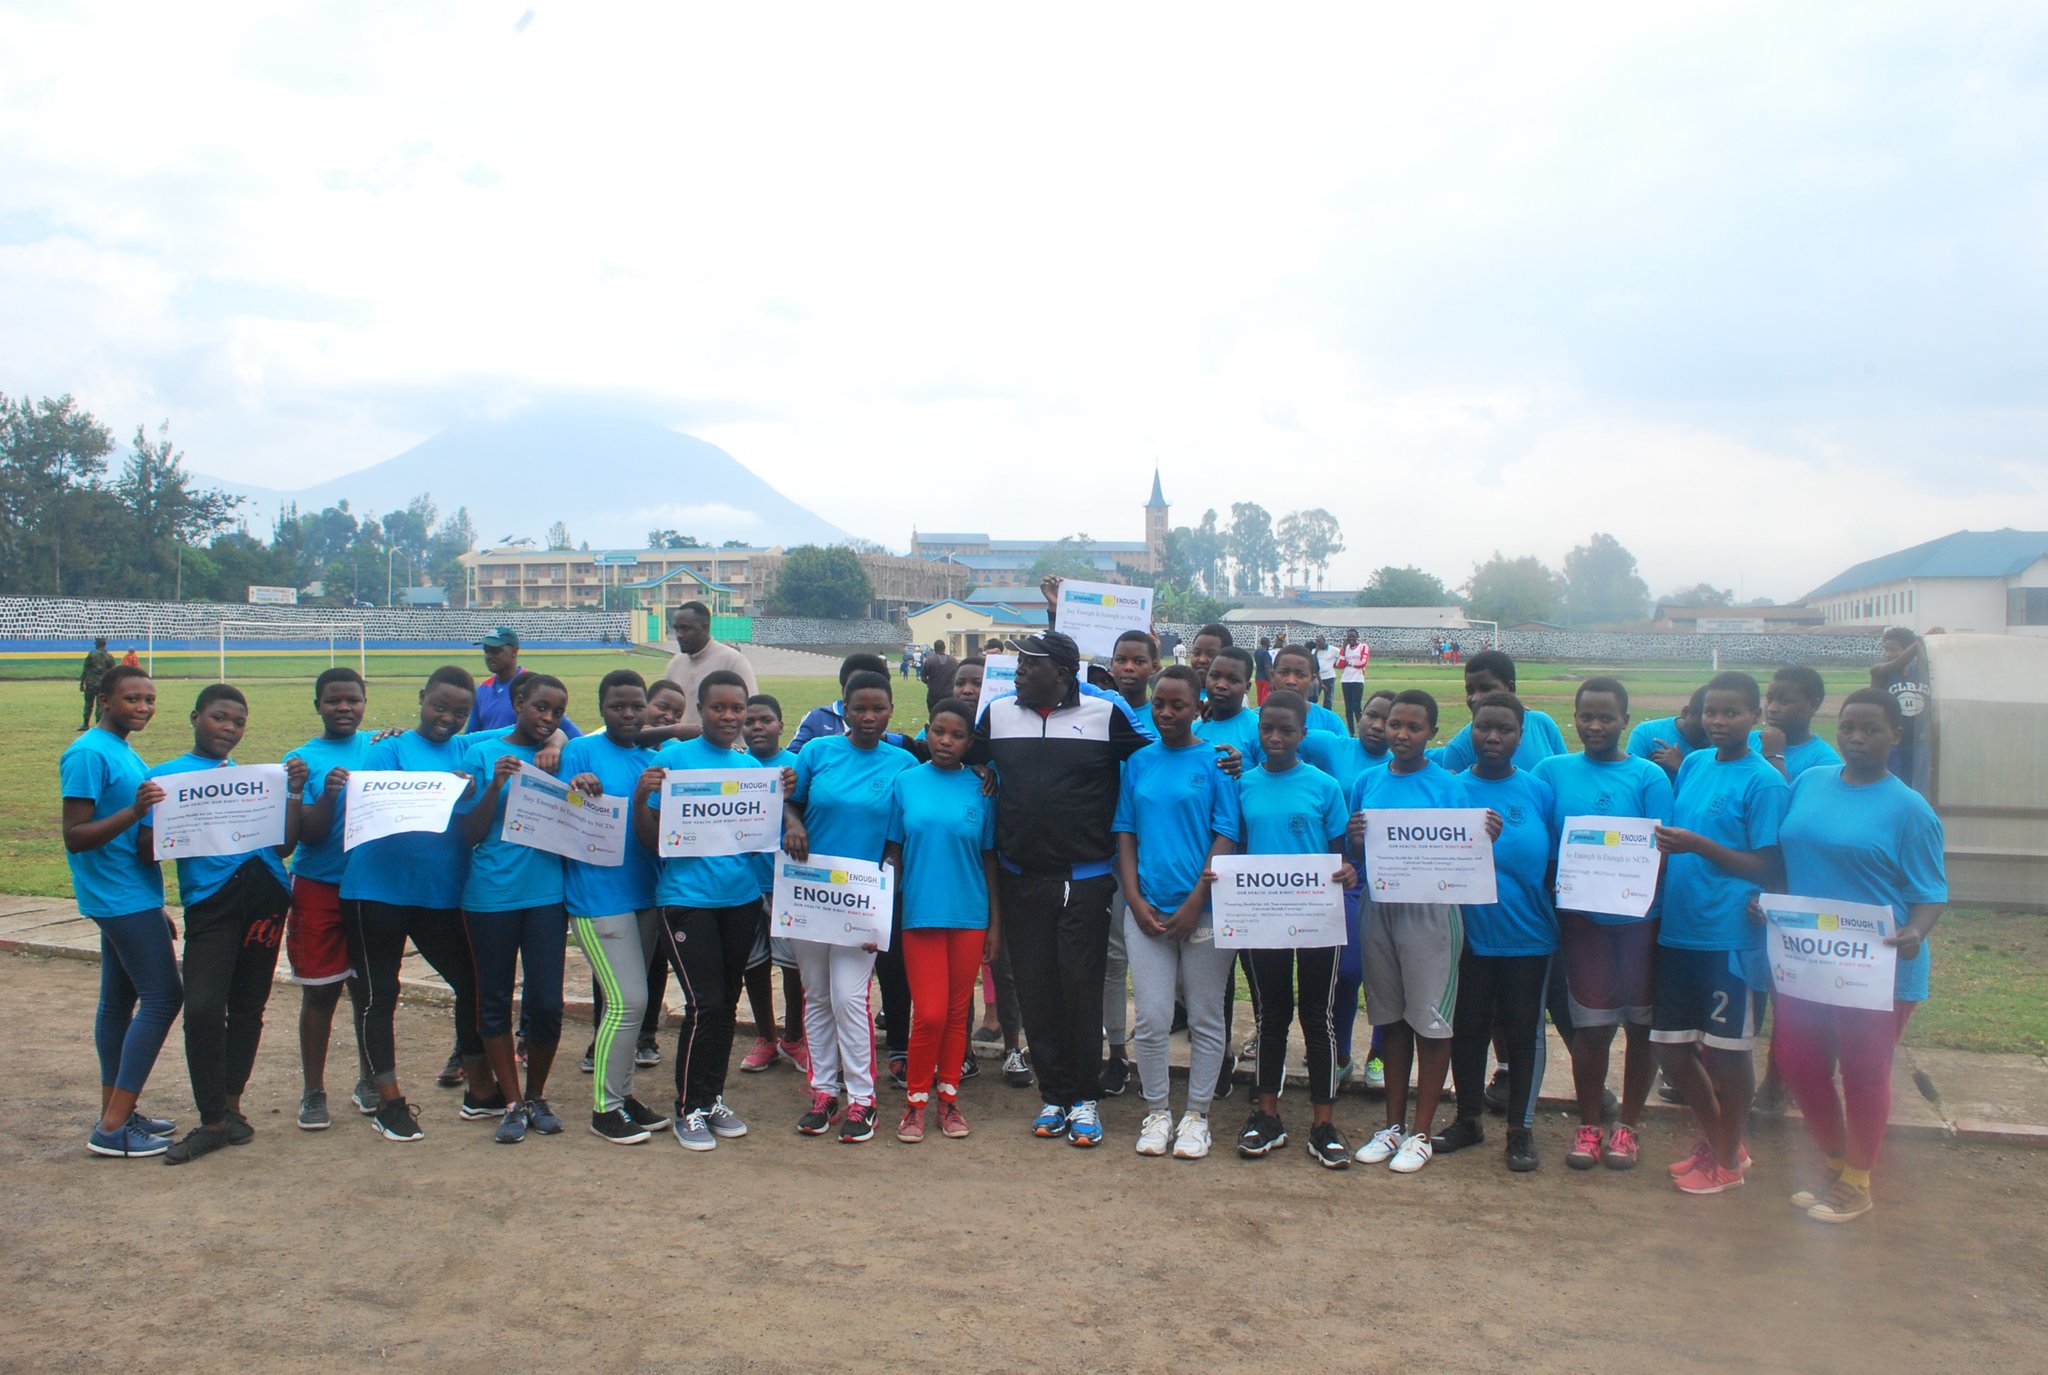 Rwanda NCD Alliance had the governor of Rwanda North join youth and PLWNCDs during Car Free Day to promote health during 2019 Week for Action on NCDs